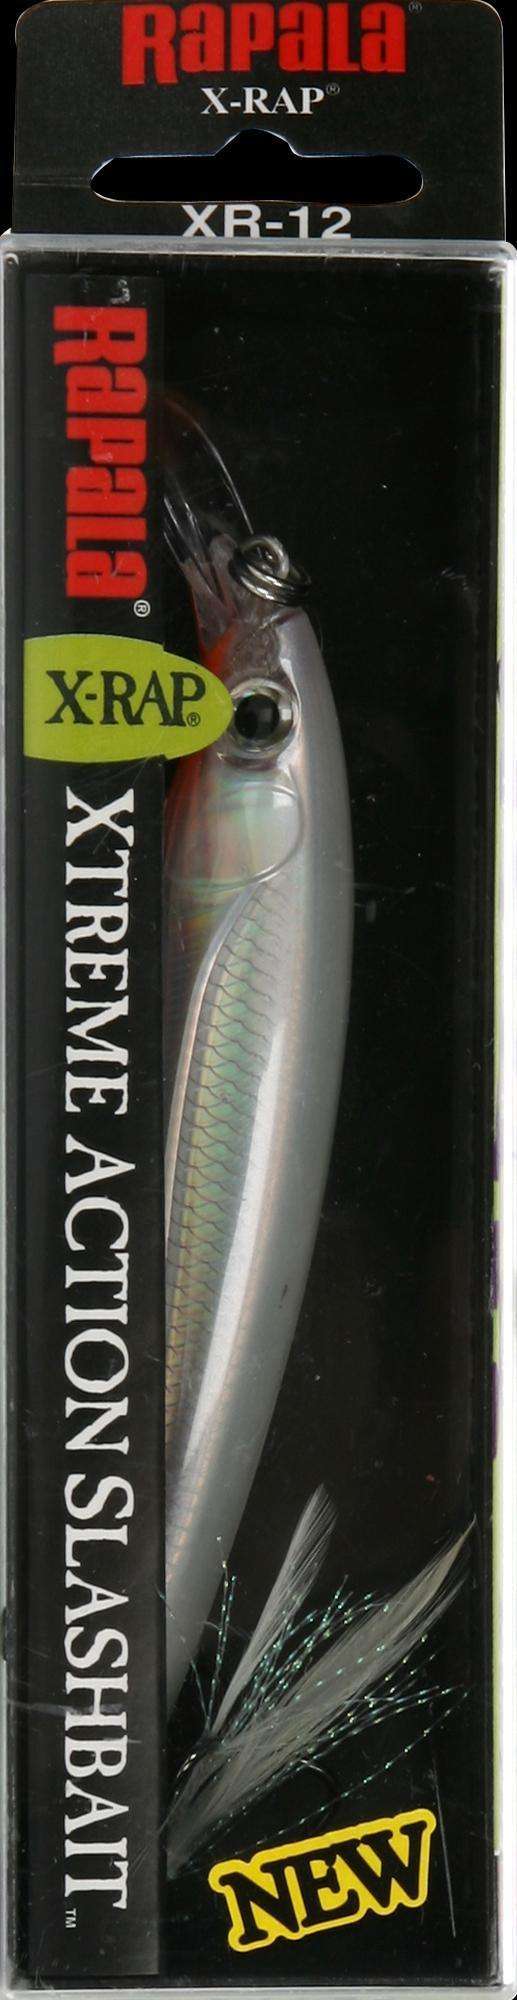 Rapala Glass Ghost X-Rap Saltwater 12 Lure 4.75'' - Ideal For